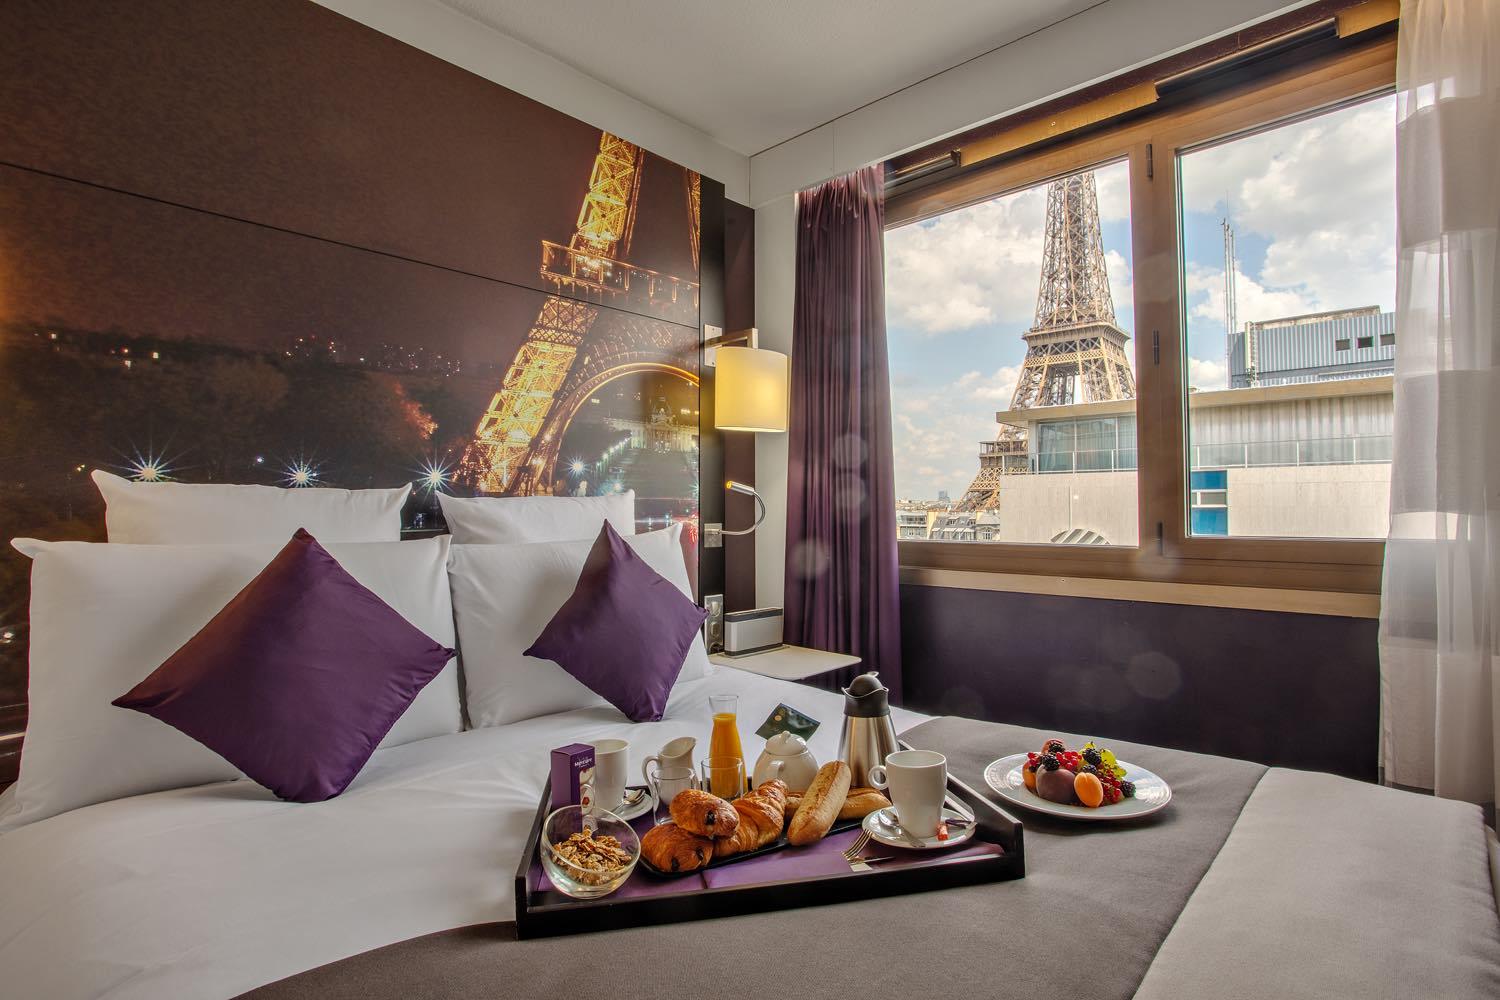 THE 20 BEST PARIS HOTELS WITH EIFFEL TOWER VIEW [2019]